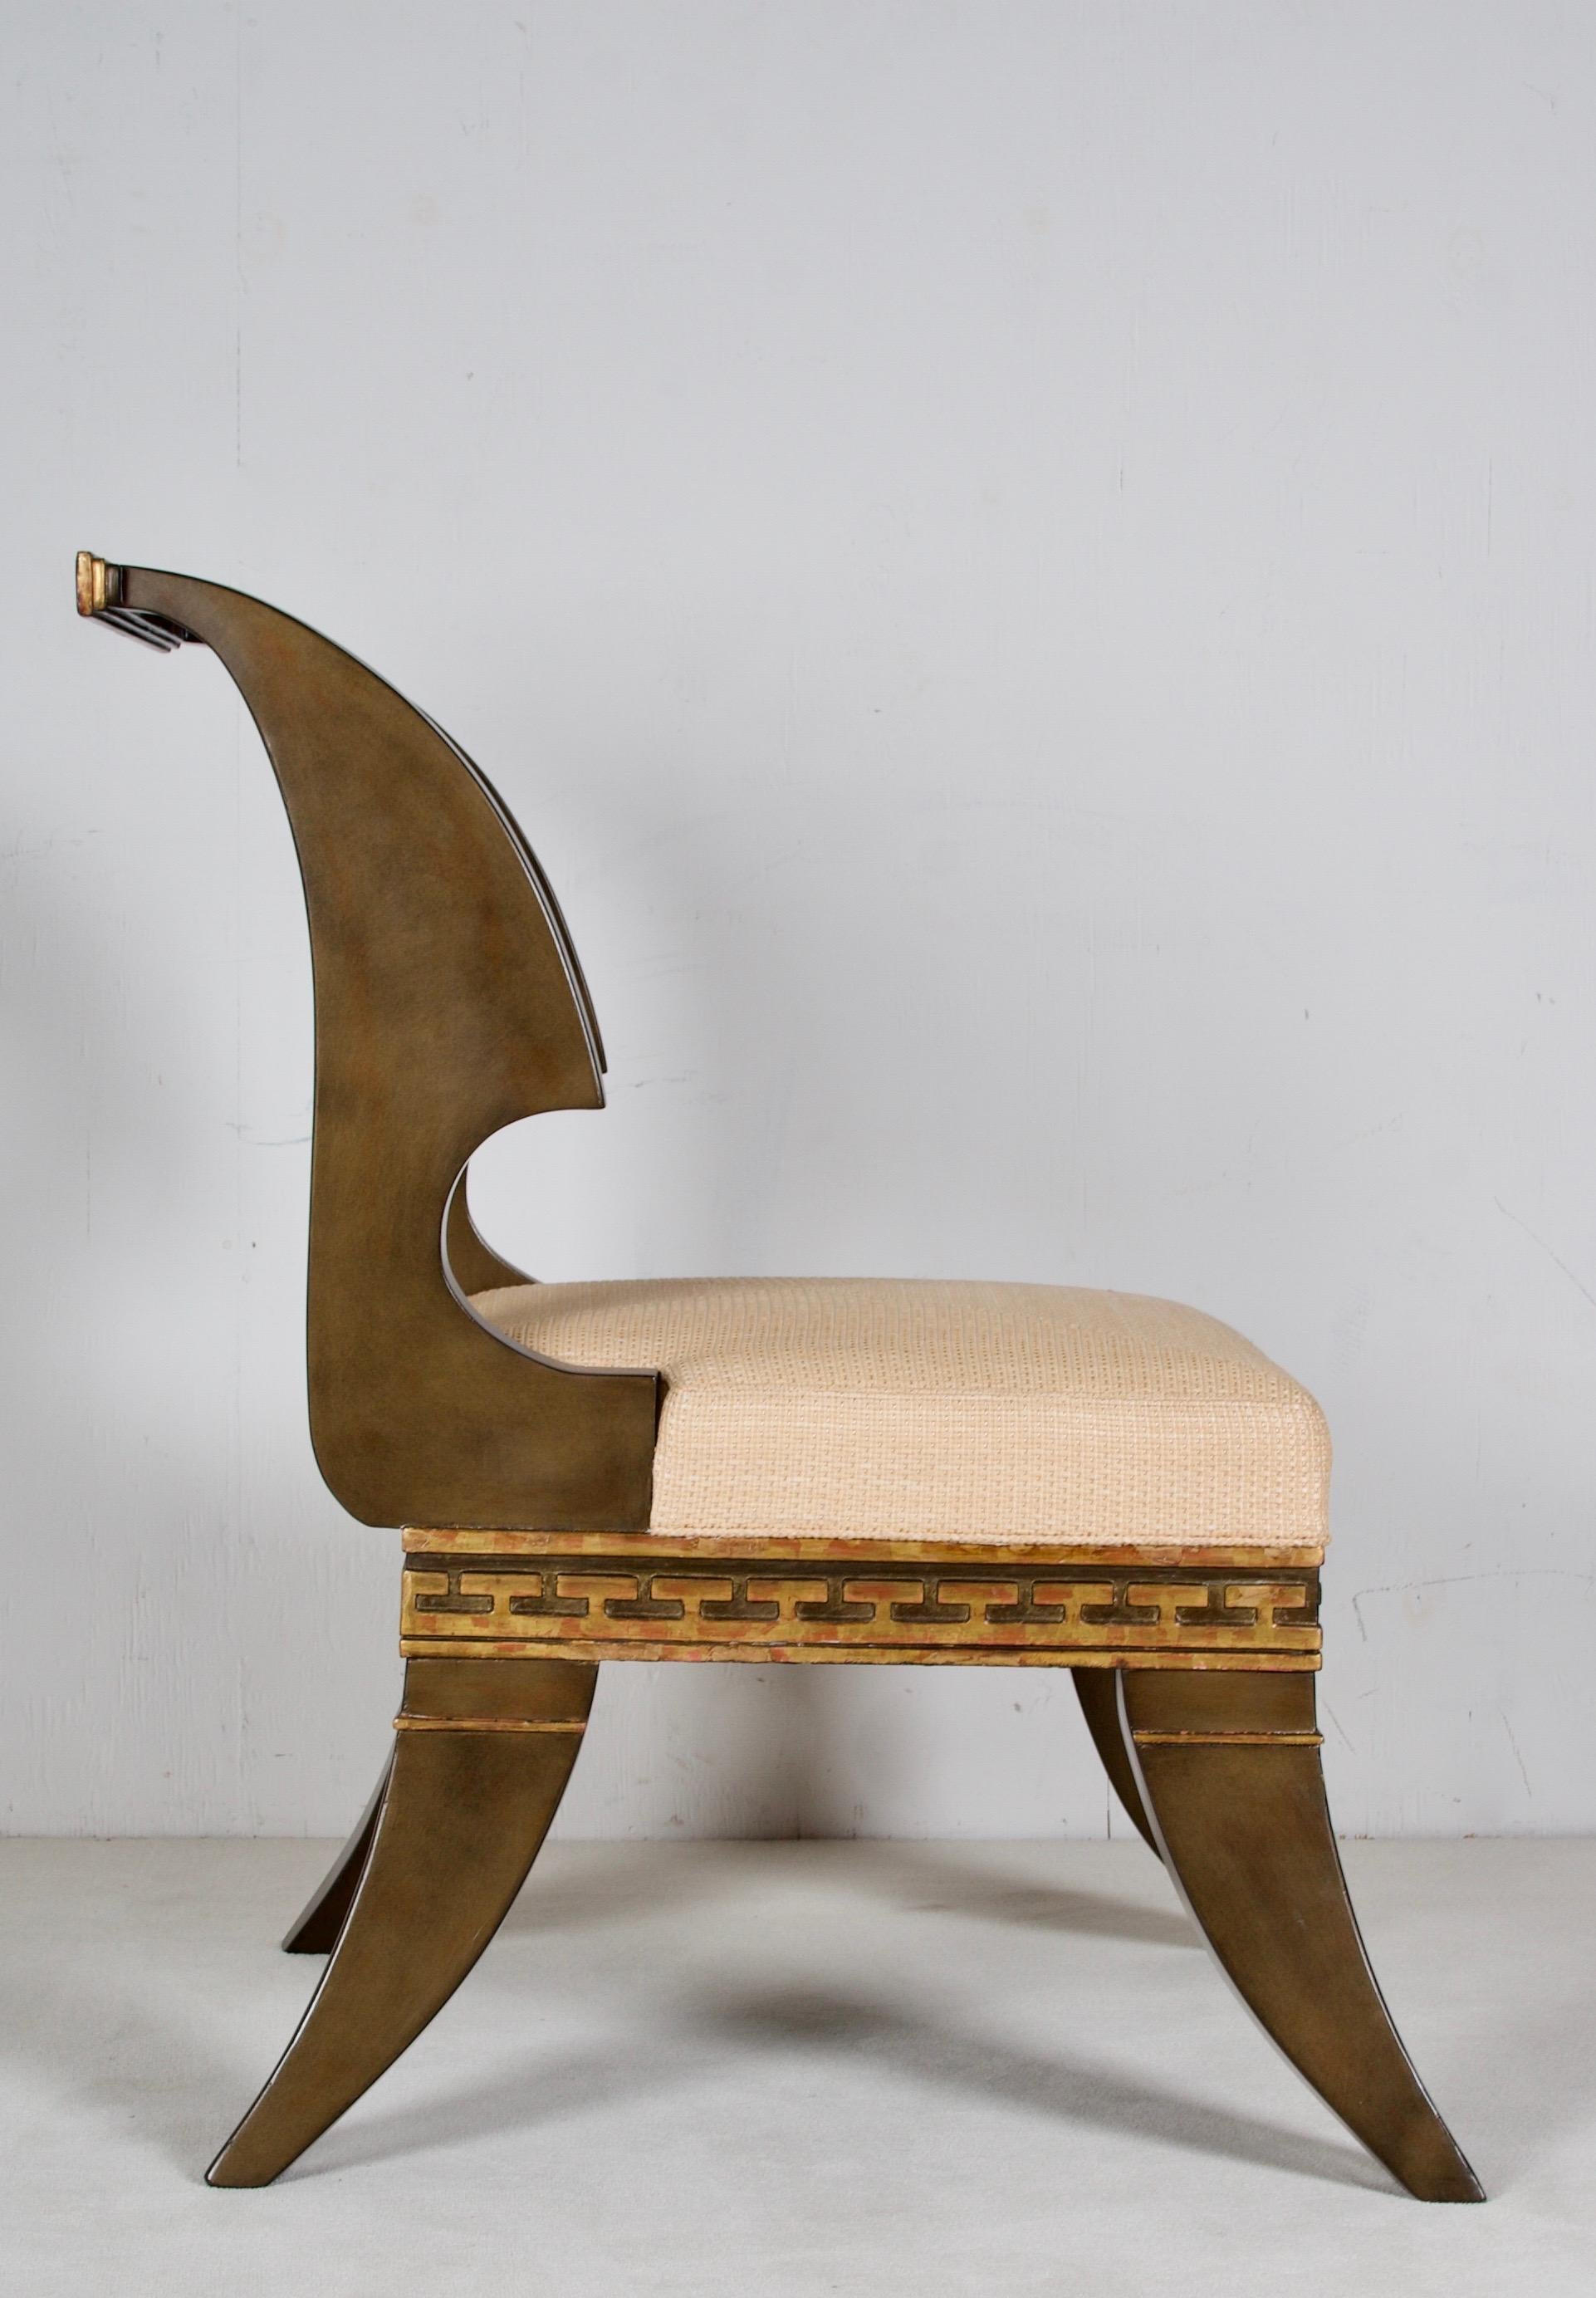 Empire Revival Modern Sabre Leg Chairs in  Engl. Neoclassic style, after a Model by Thomas Hope For Sale